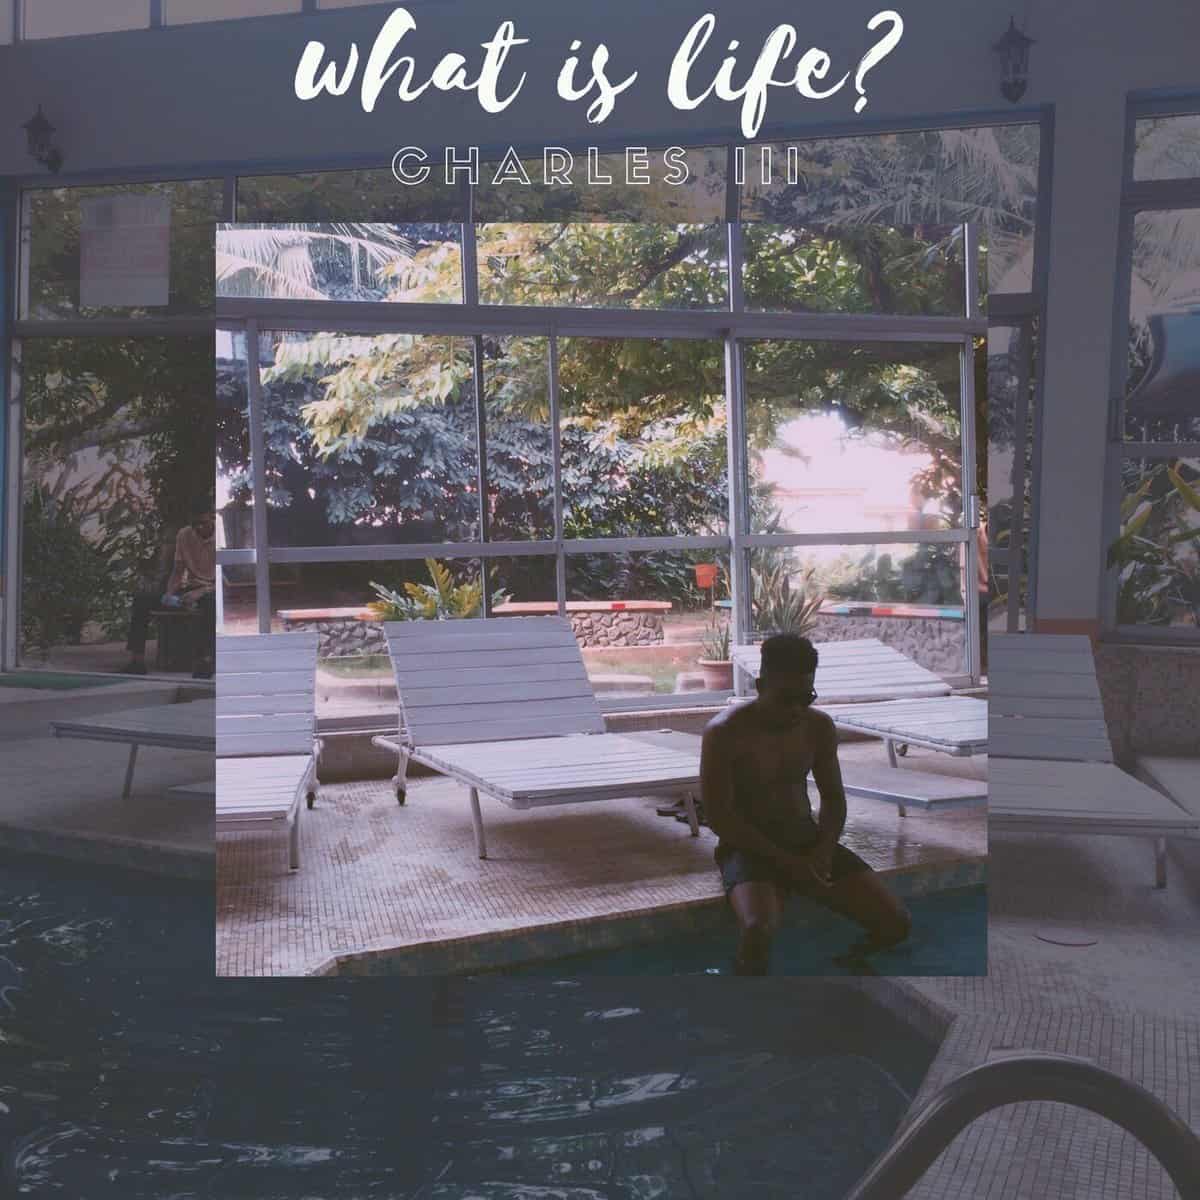 Charles III is too woke to be living in dreams on “What is Life?”